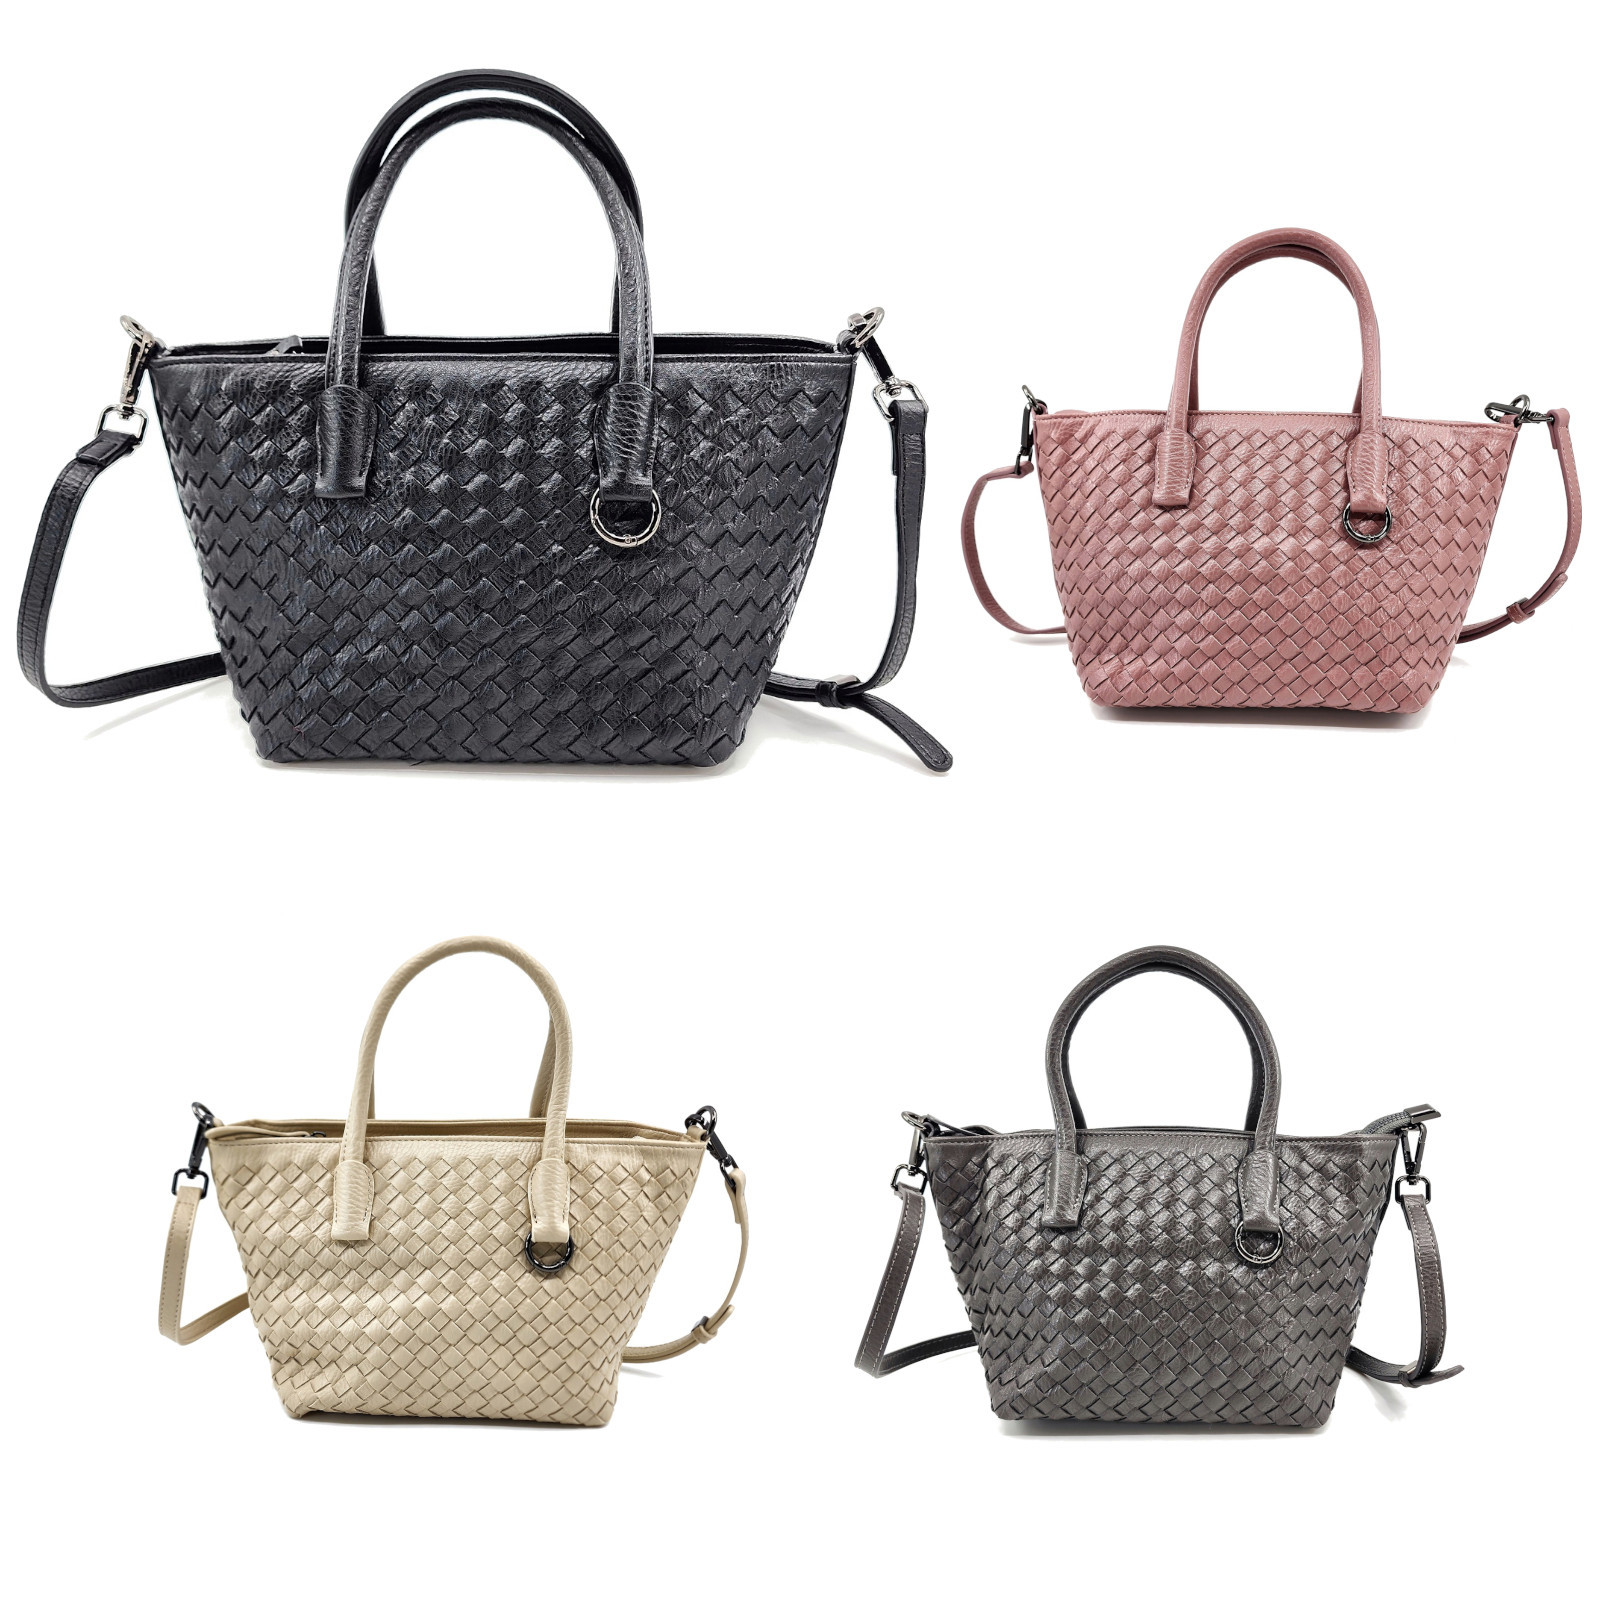 Primary image for Women's Vegan Leather Woven Small Top Zip Satchel Tote